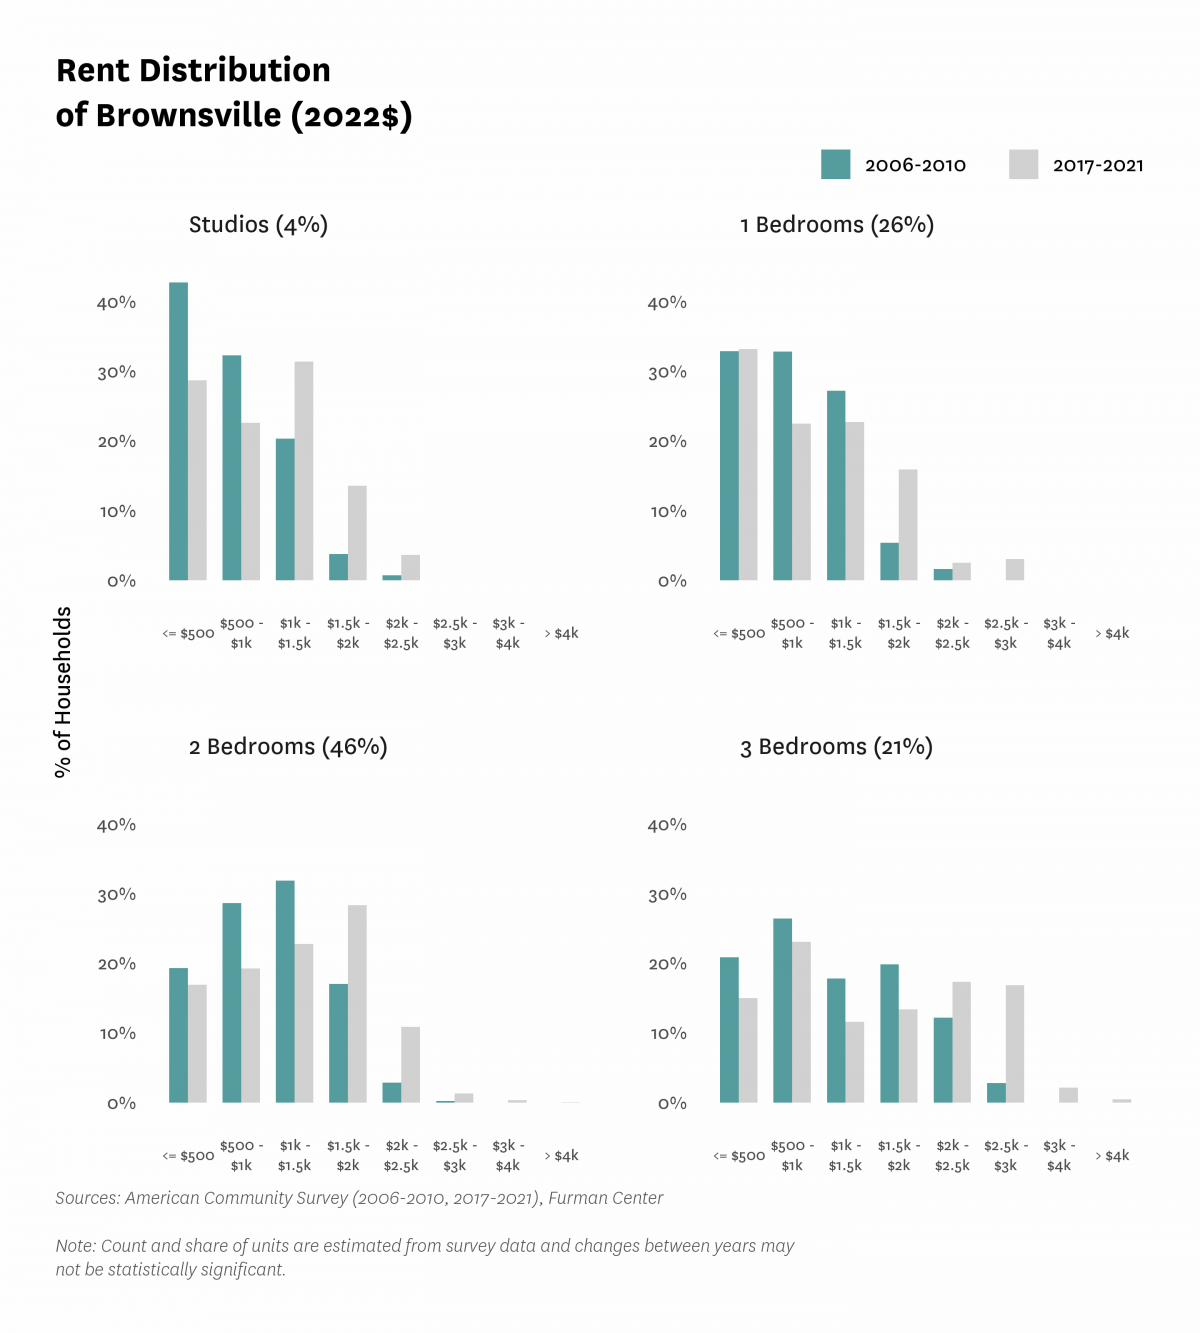 Graph showing the distribution of rents in Brownsville in both 2010 and 2017-2021.